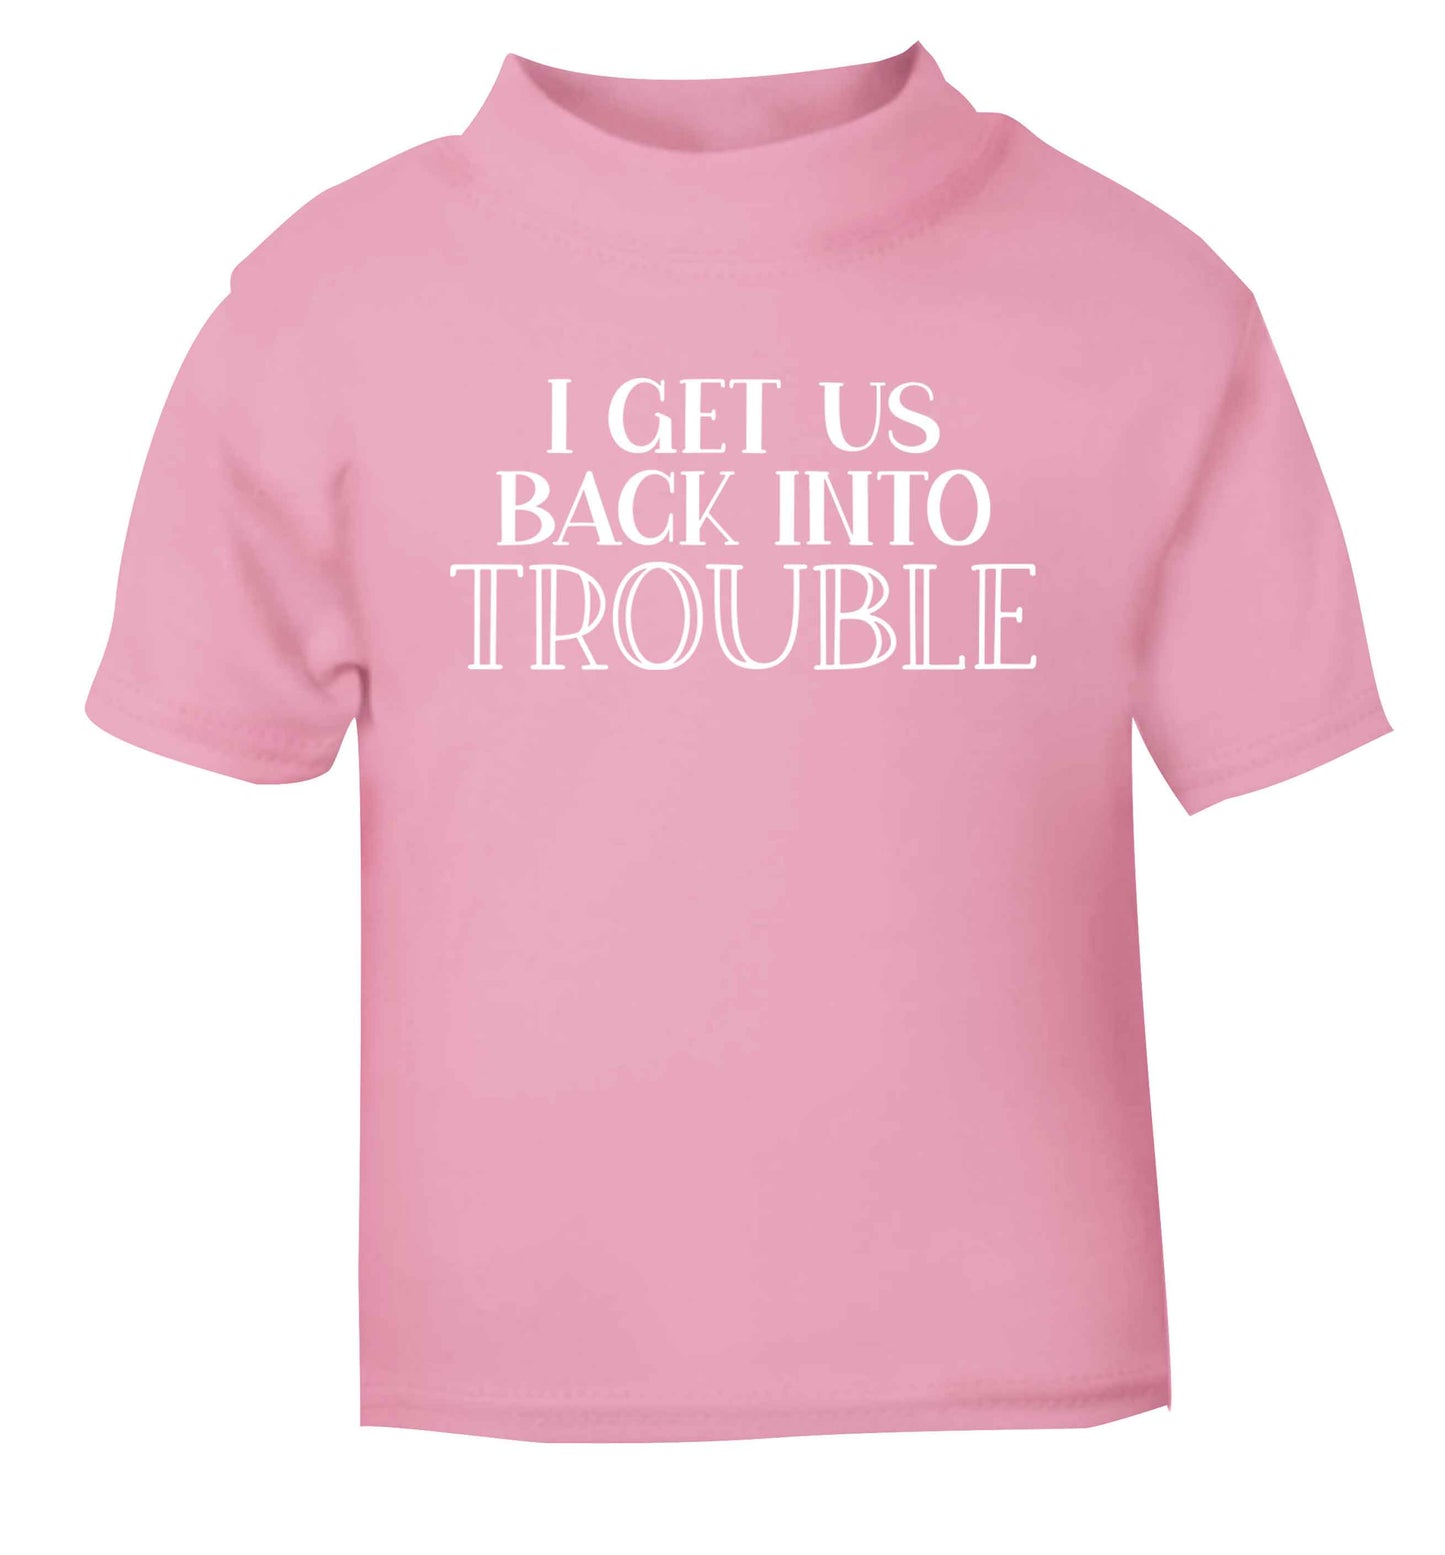 I get us back into trouble light pink baby toddler Tshirt 2 Years